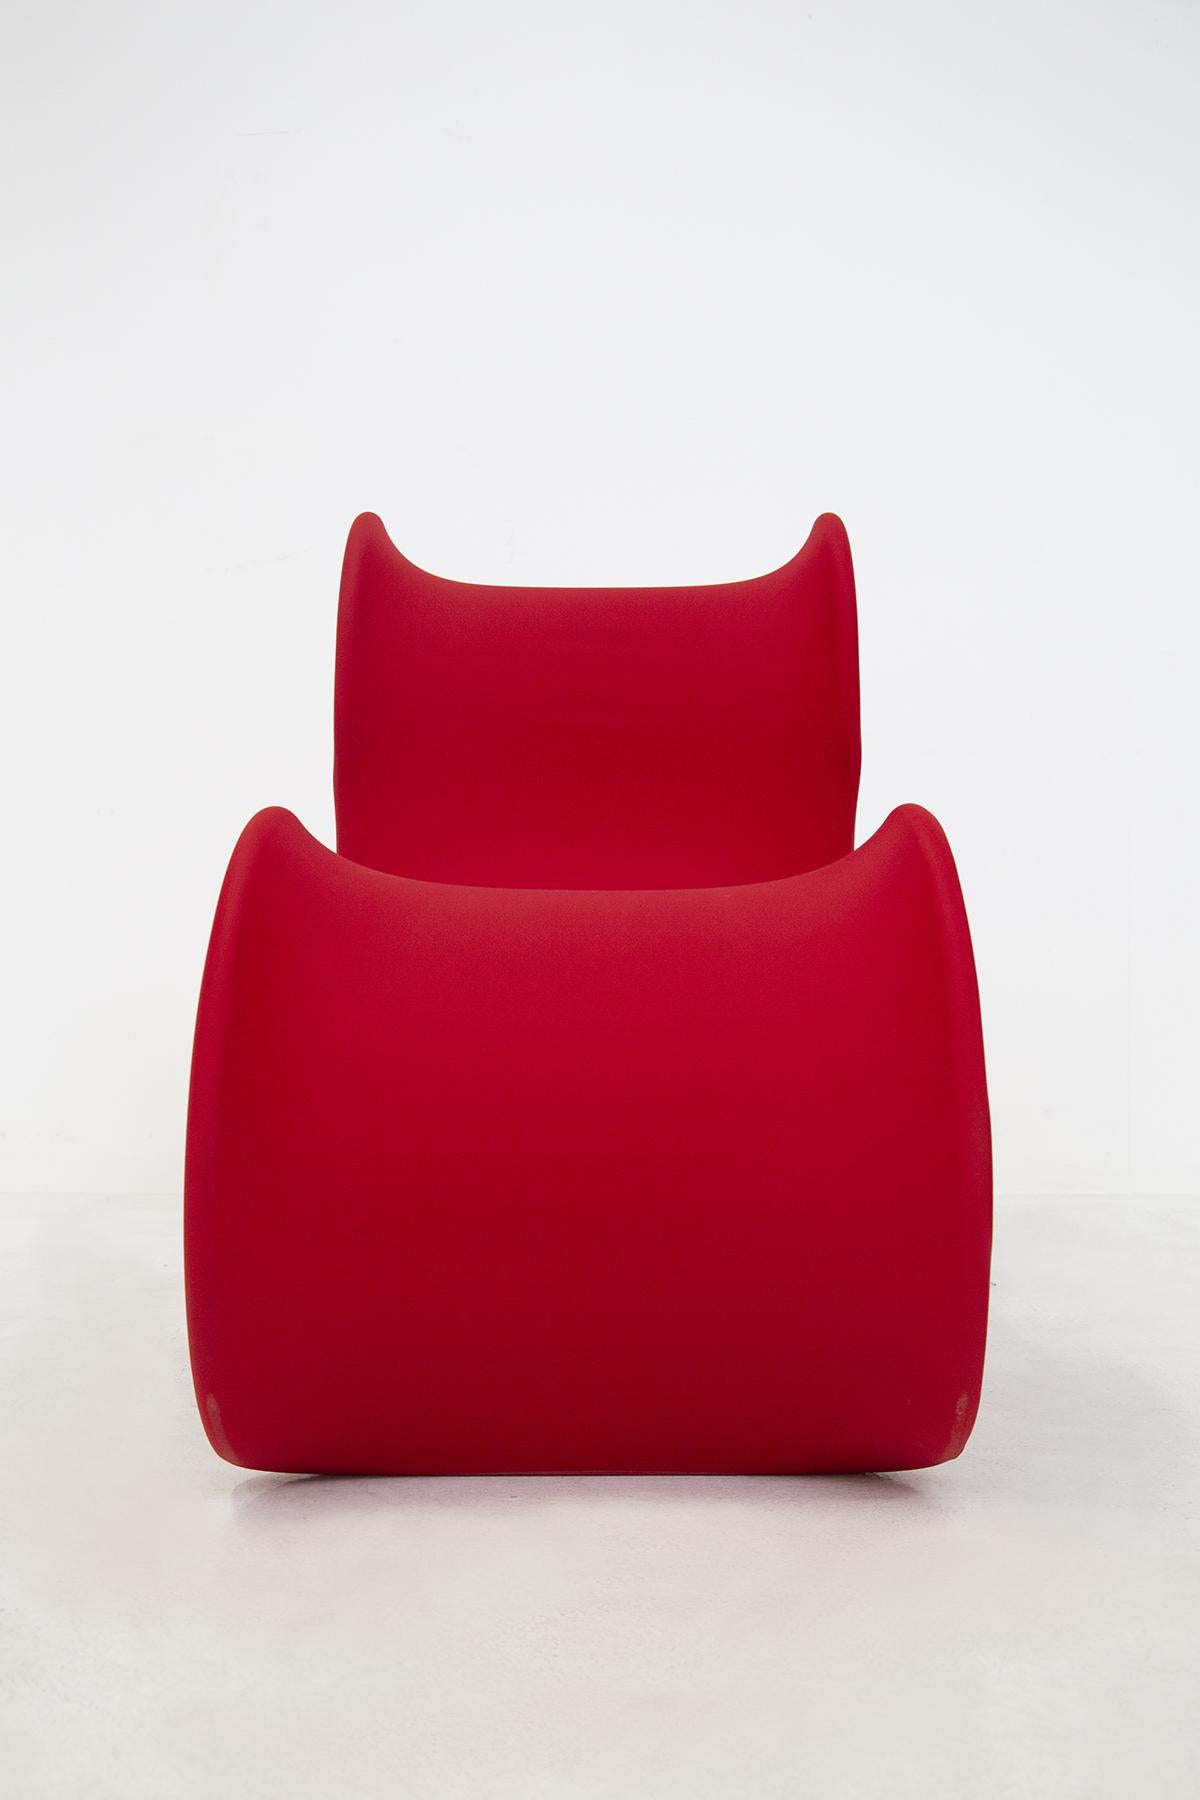 Gianni Pareschi Red Fiocco Armchair for Busnelli 1